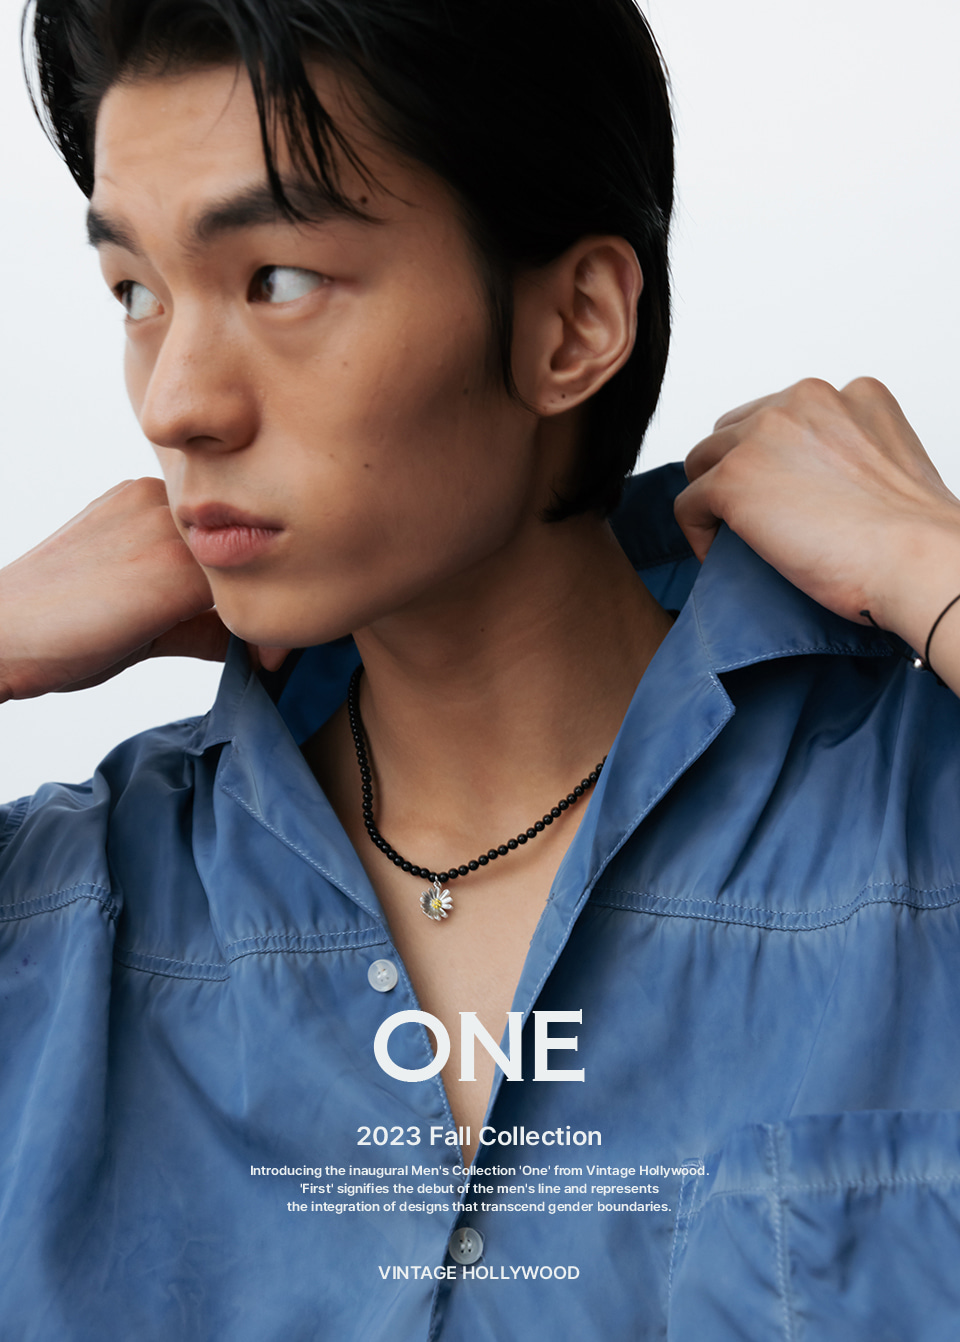 23 FALL COLLECTION [ONE]